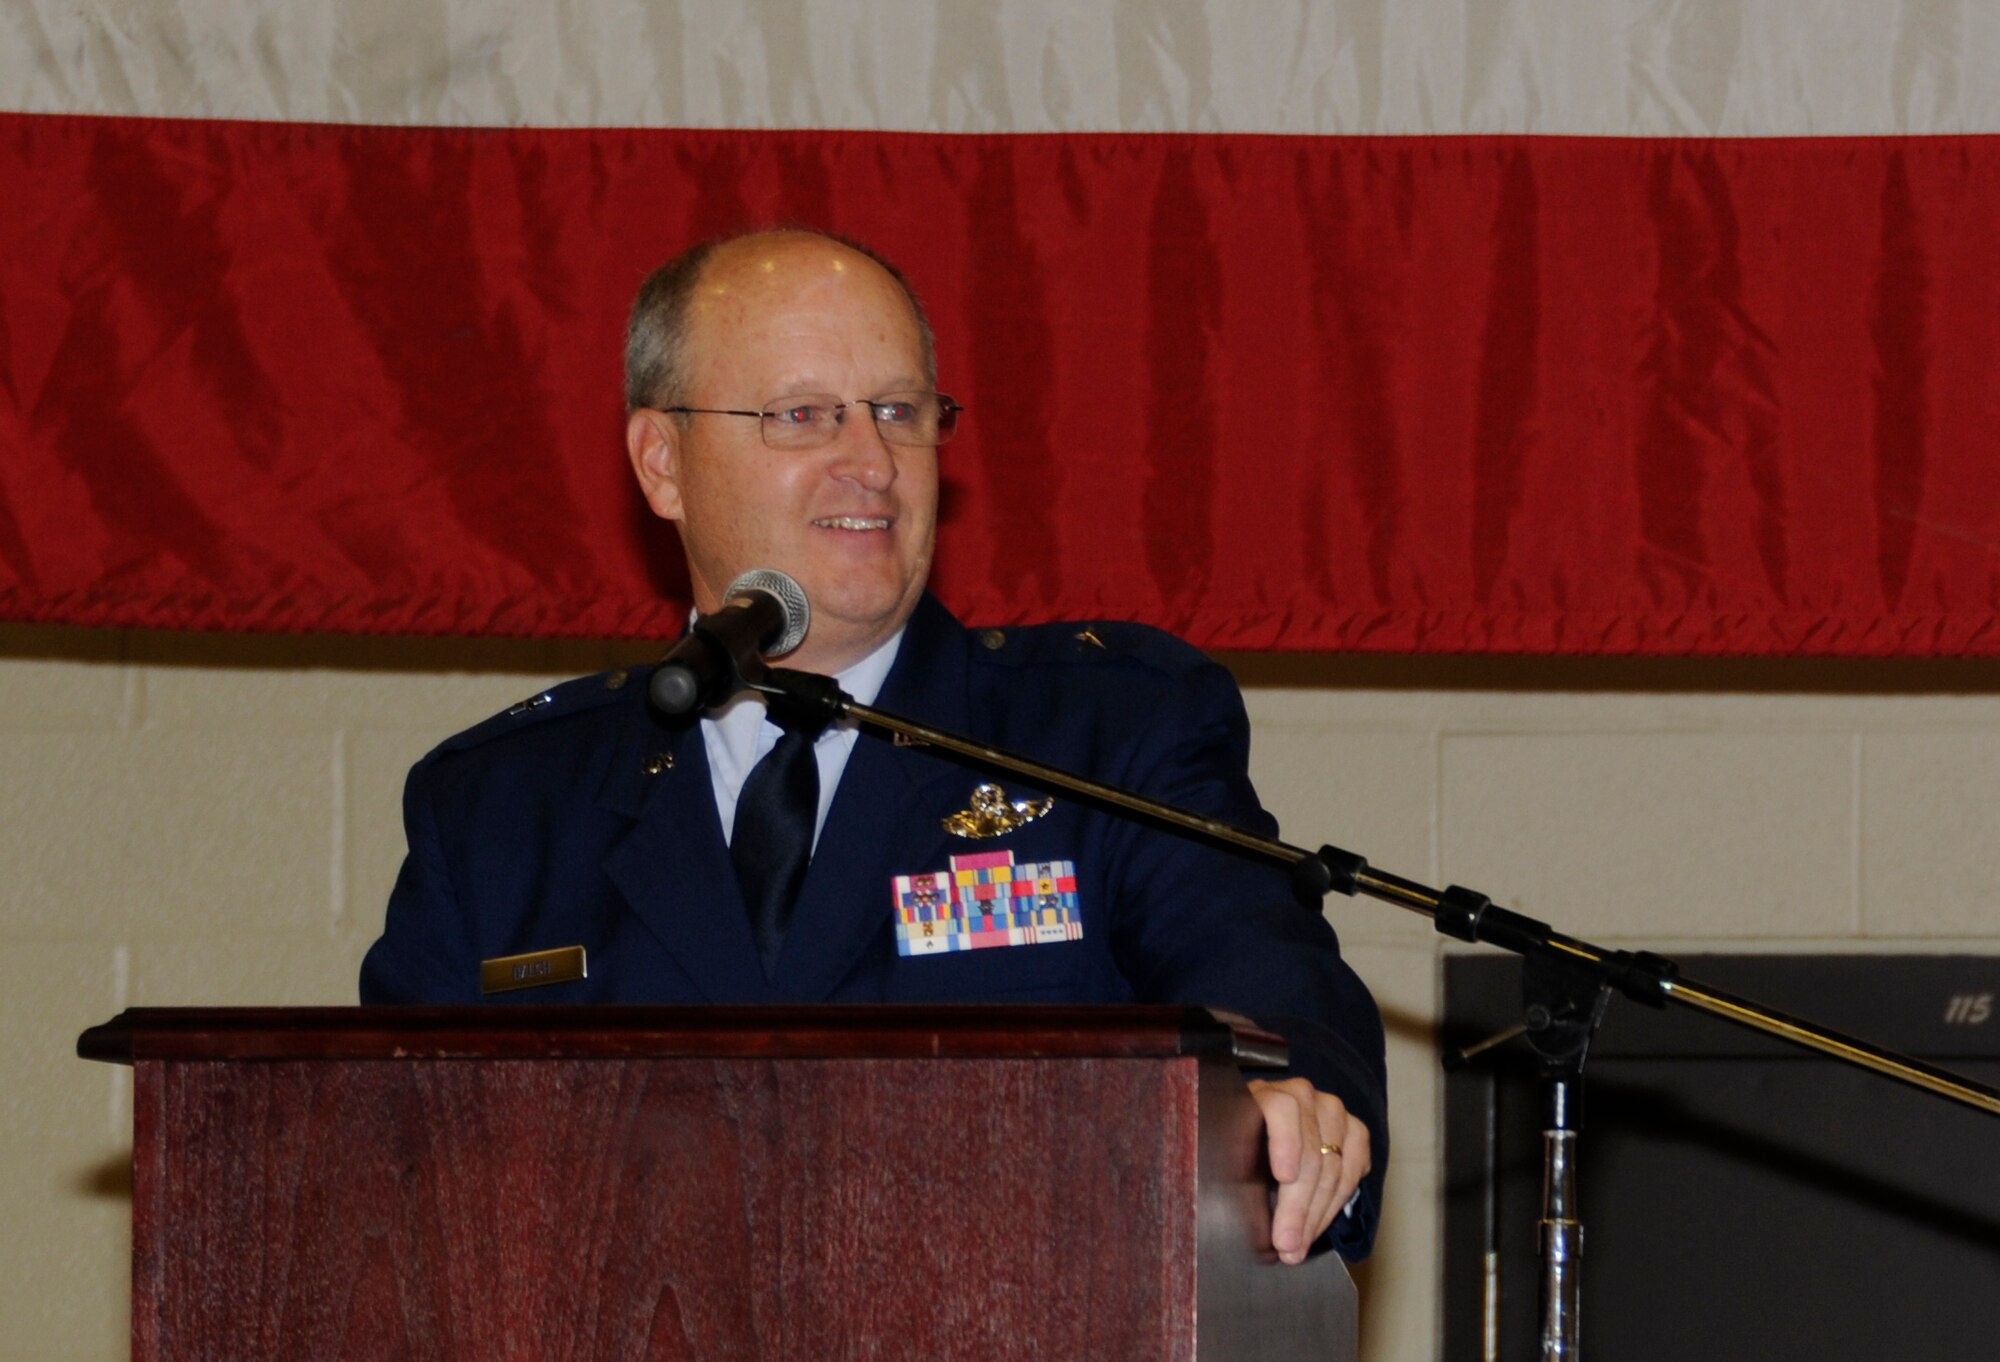 Brig. Gen. Dwight Balch, Arkansas Air Nation Guard commander, addresses Airmen during the 188th Wing change of command ceremony Jan. 11, 2015, held at Ebbing ANG Base, Fort Smith, Ark.  During the ceremony Col. Bobbi Doorenbos became the first female to command the 188th Wing. Doorenbos assumed command after serving as the 214th Reconnaissance Group commander for the Arizona ANG at Davis-Monthan Air Force Base. (U.S. Air National Guard photo by Staff Sgt. Hannah Dickerson/released)